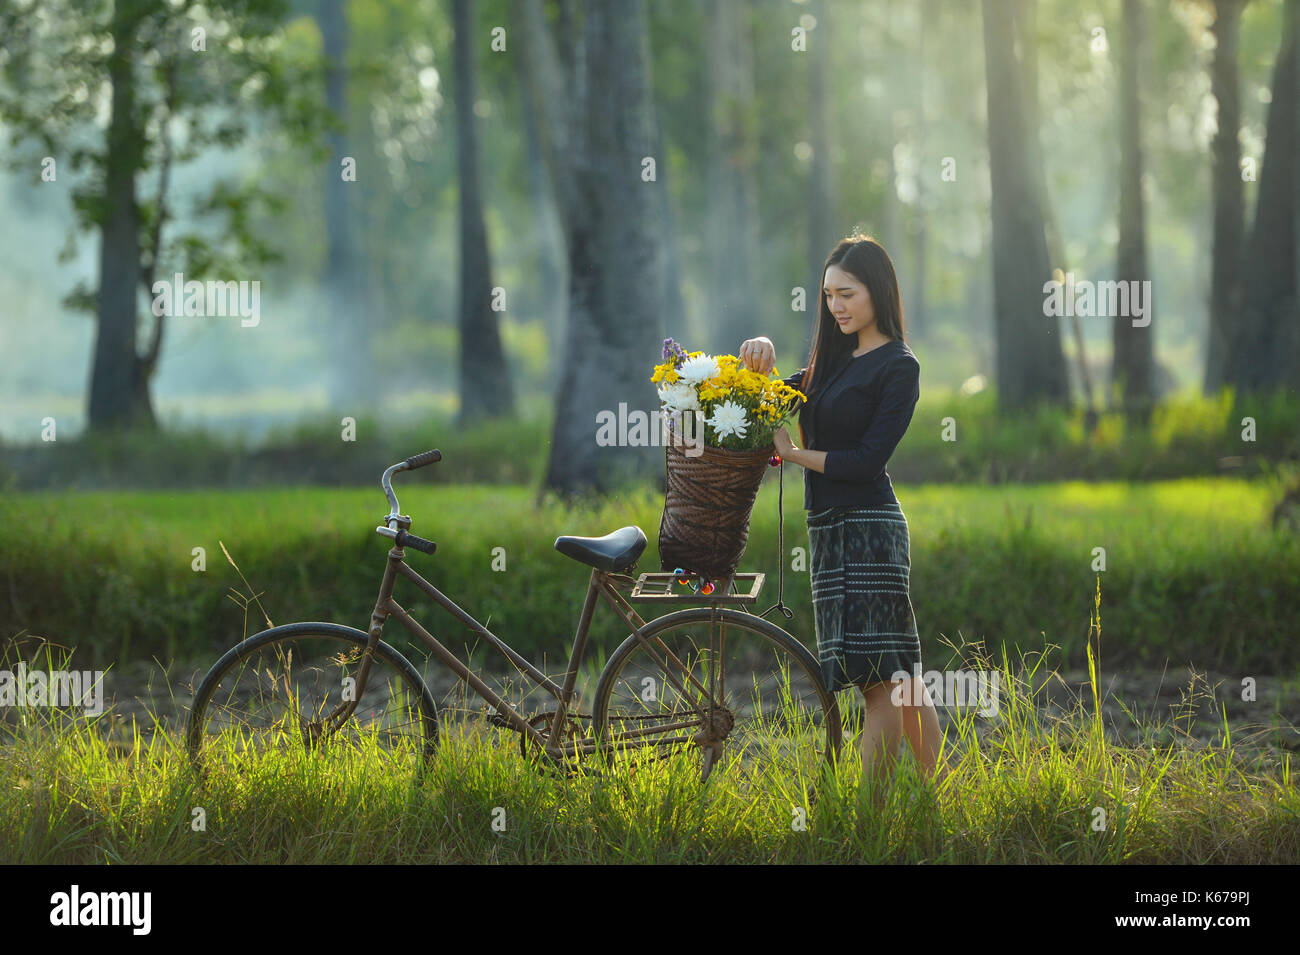 Woman with a basket of flowers on her bicycle, Thailand Stock Photo